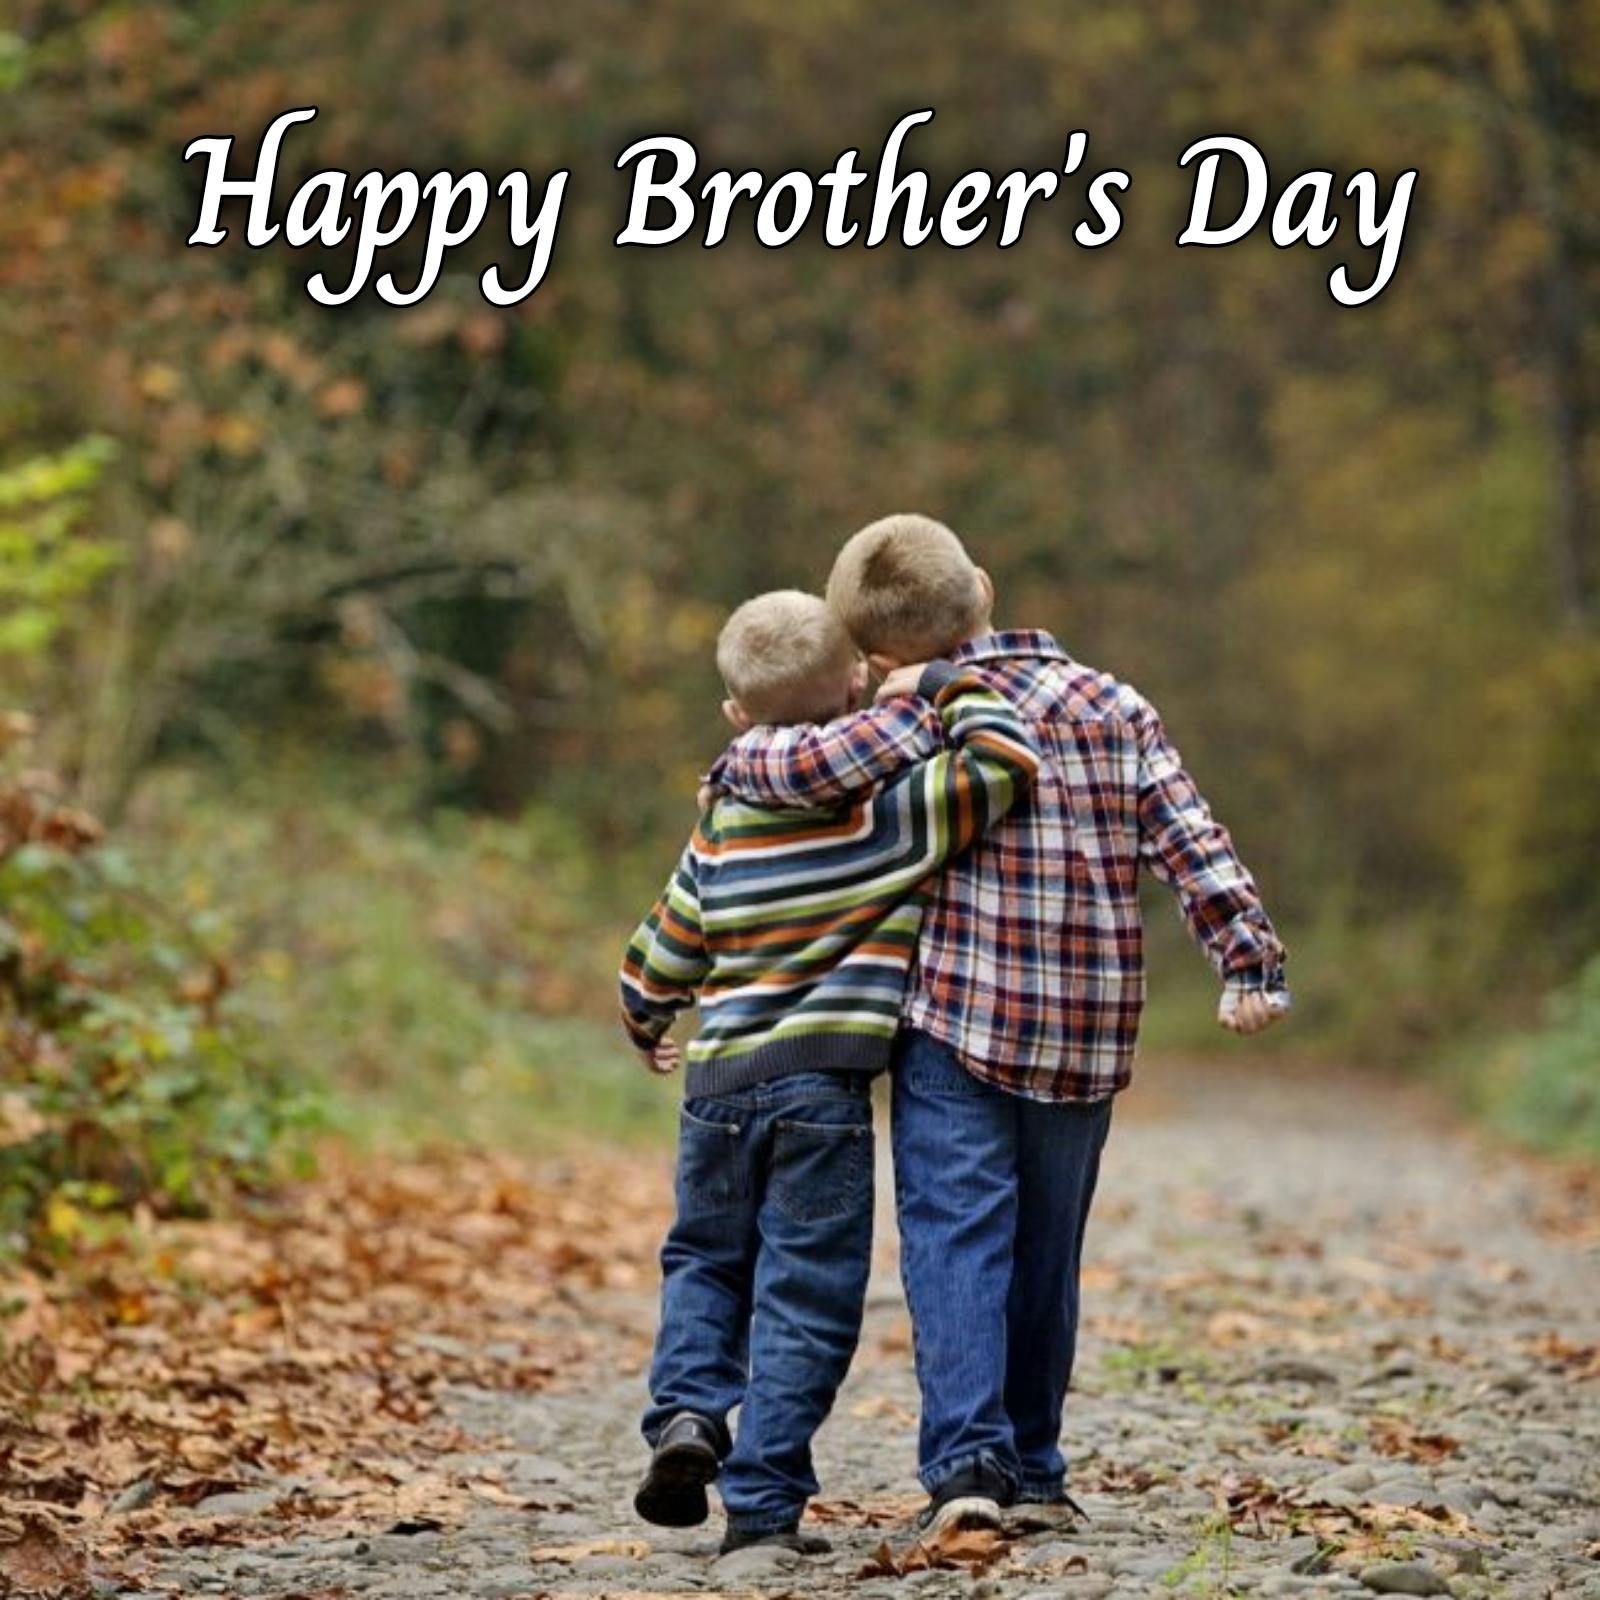 Brothers are the Best | Gloasters.com